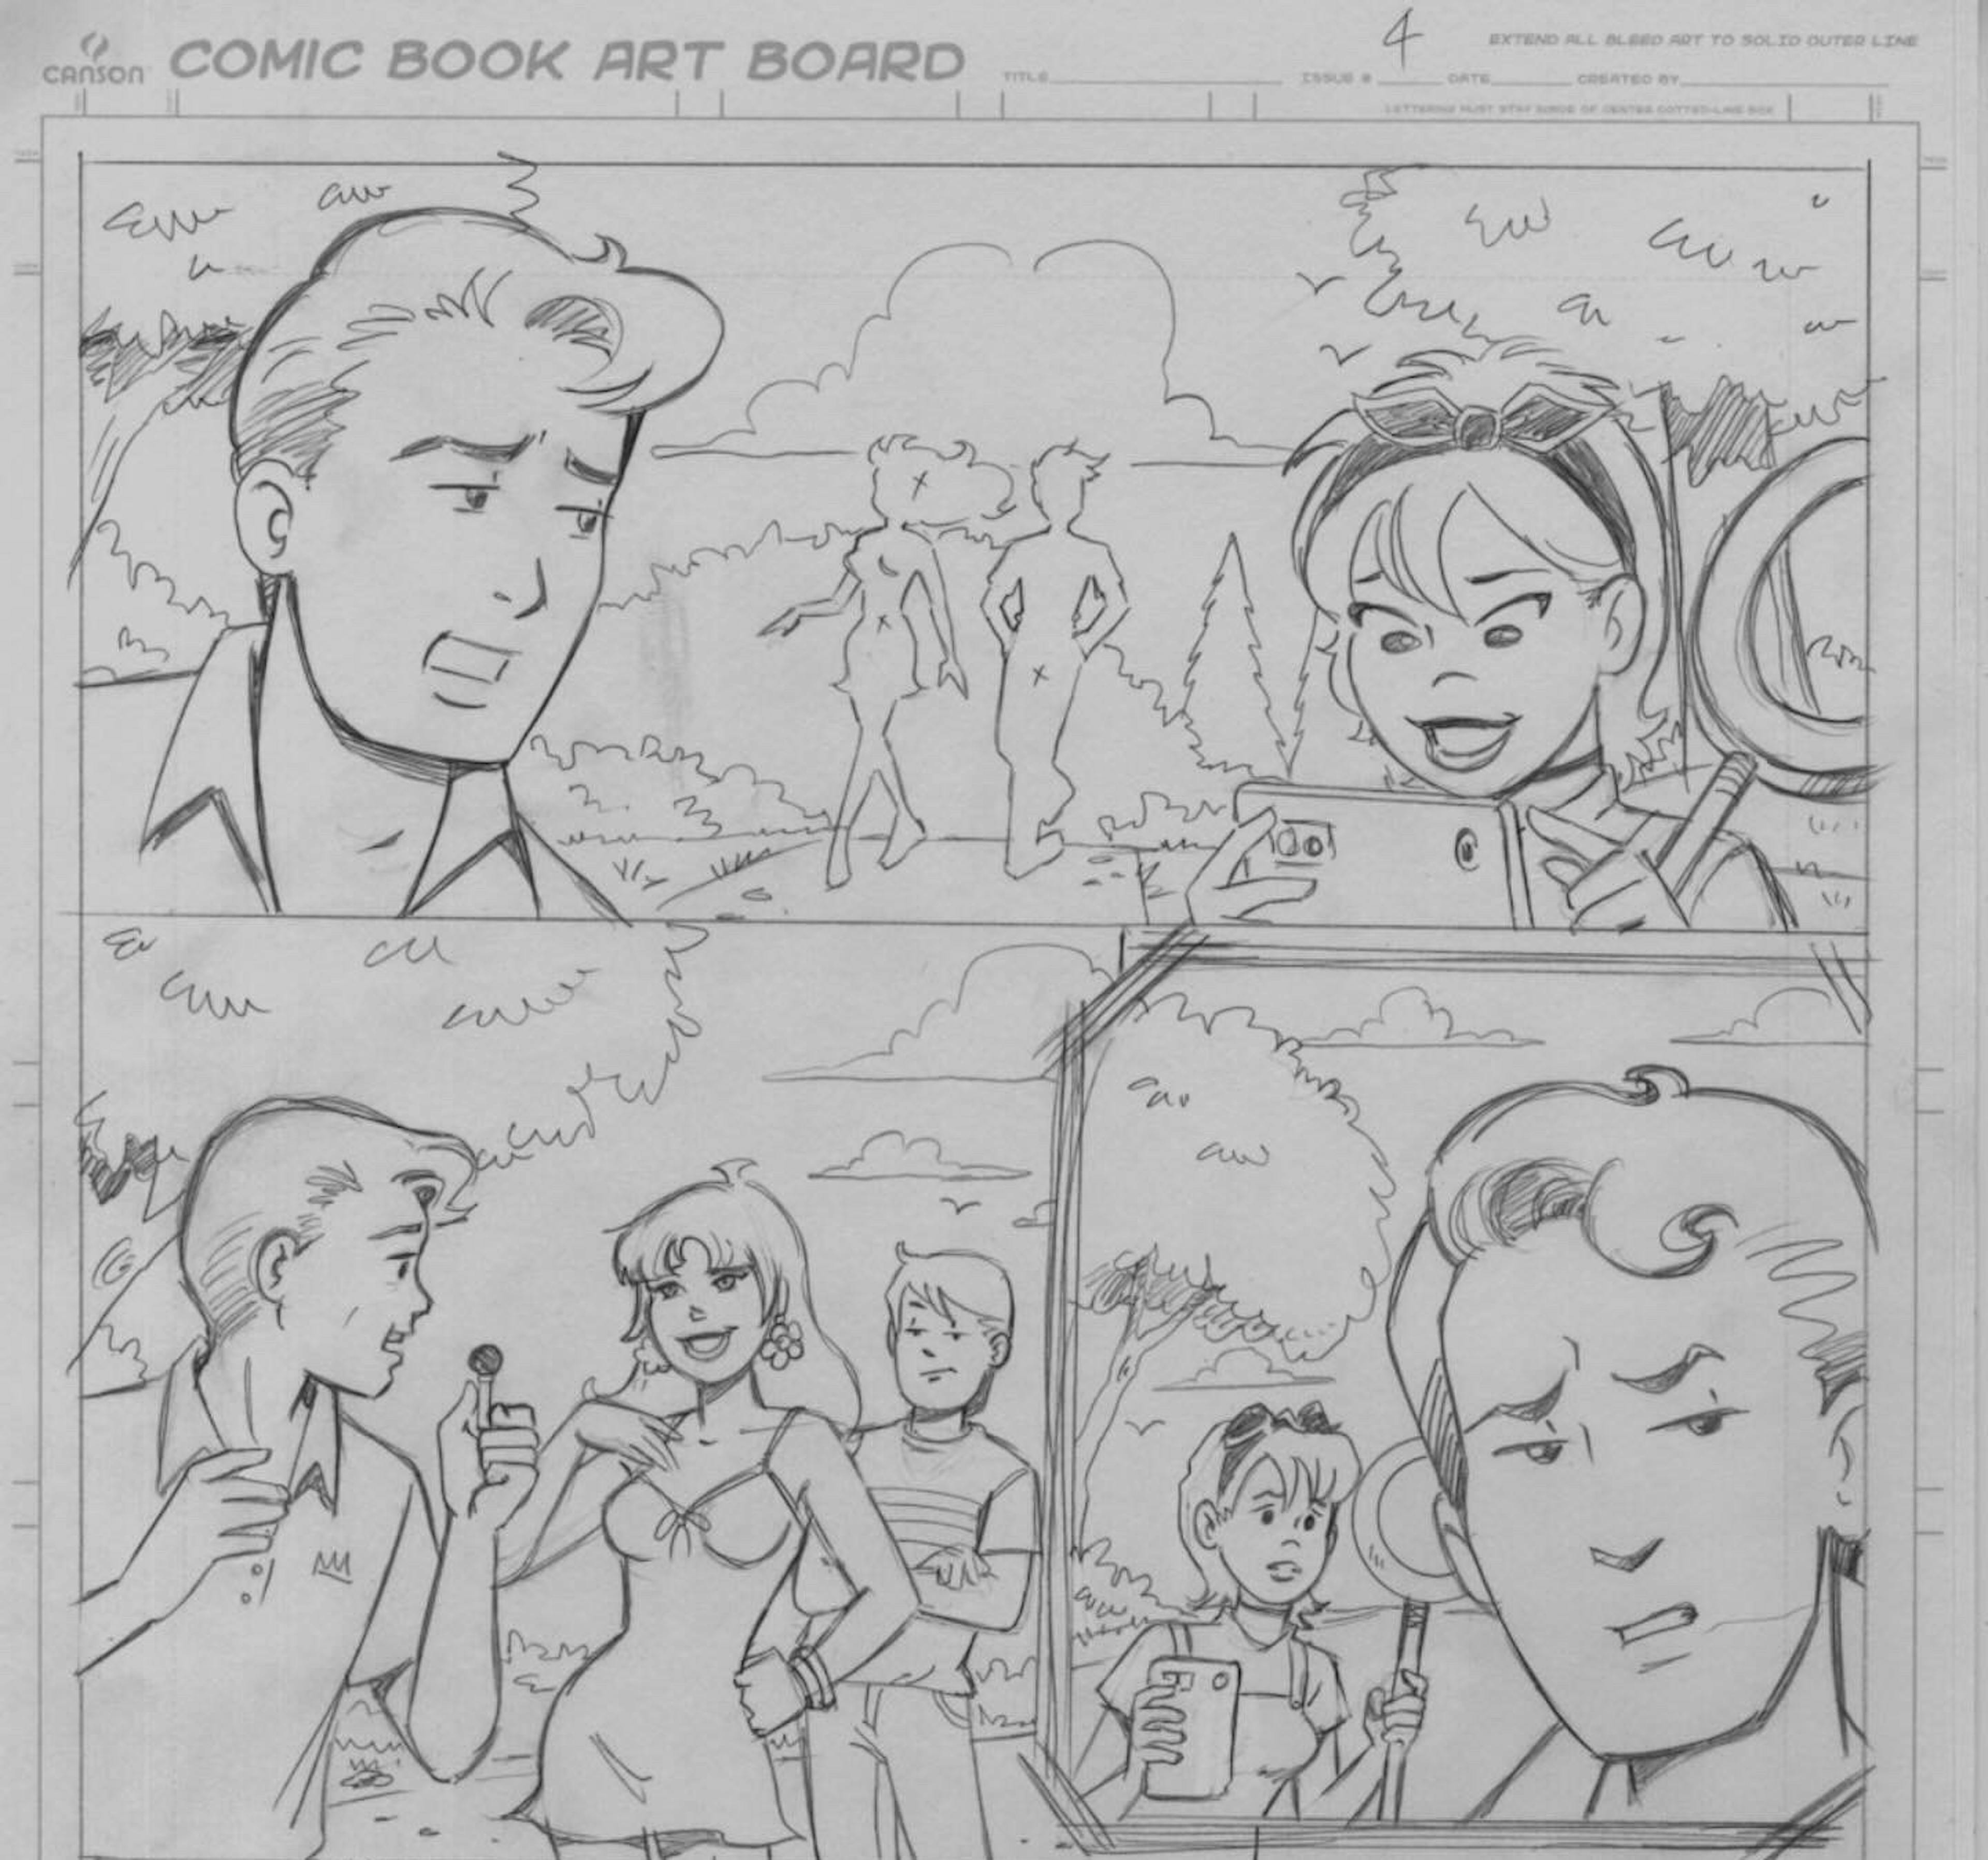 In this early pencil sketch by Archie Comics artist, Holly Golightly, draws in a Riverdale character, Sally, pictured on upper right, who serves as Young Dr. Masters’ assistant. She has been drawn to look like writer Goldie Chan, one of many fun easter eggs for Archie fans. This feature will appear in BETTY & VERONICA DIGEST #325: The Doctor Does Dating featuring Young Dr. Masters, on sale in retailers on June 19th, 2024.